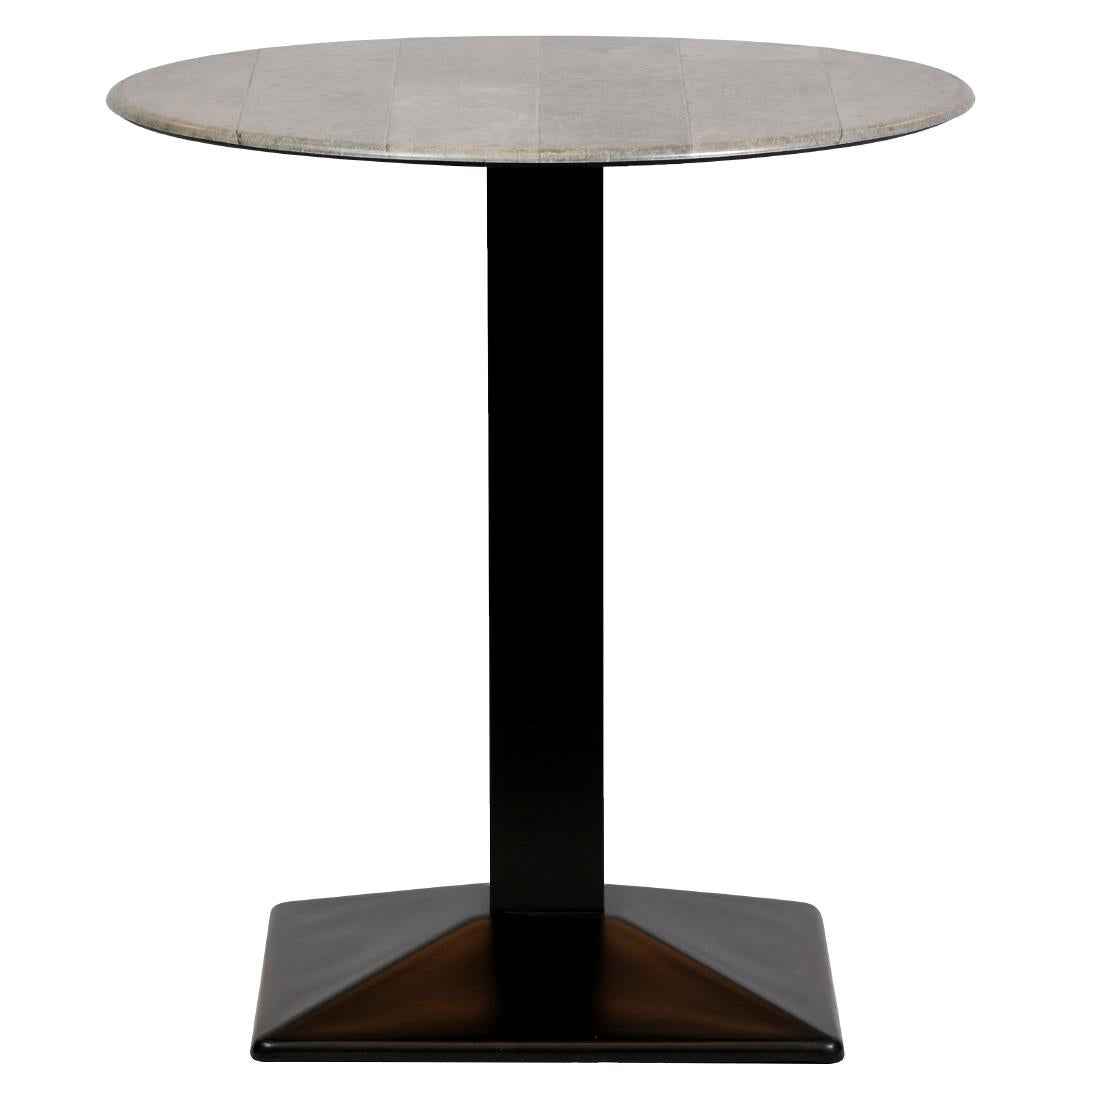 CZ819 Turin Metal Base Round Dining Table with Laminate Top Concrete 600mm JD Catering Equipment Solutions Ltd